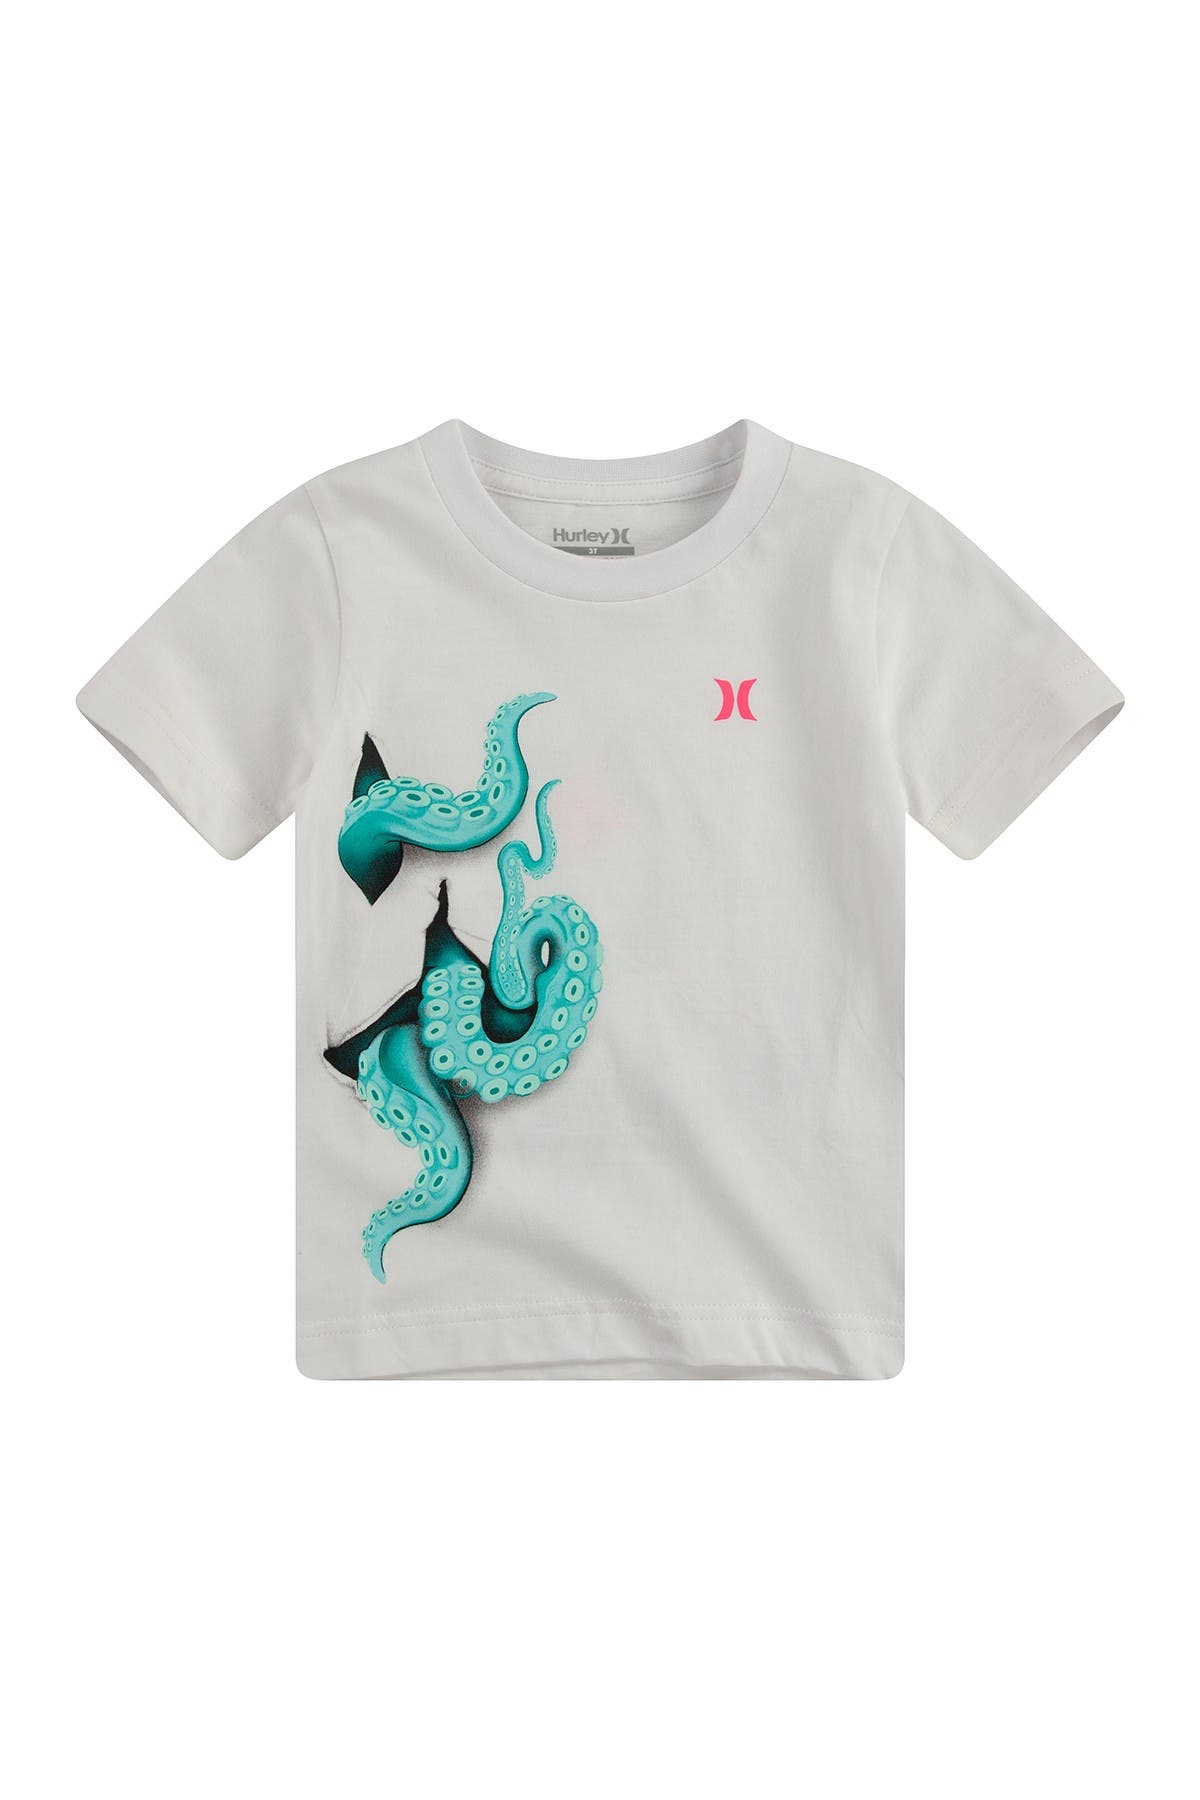 Hurley Kids' Octo Wrap Tee In 001white